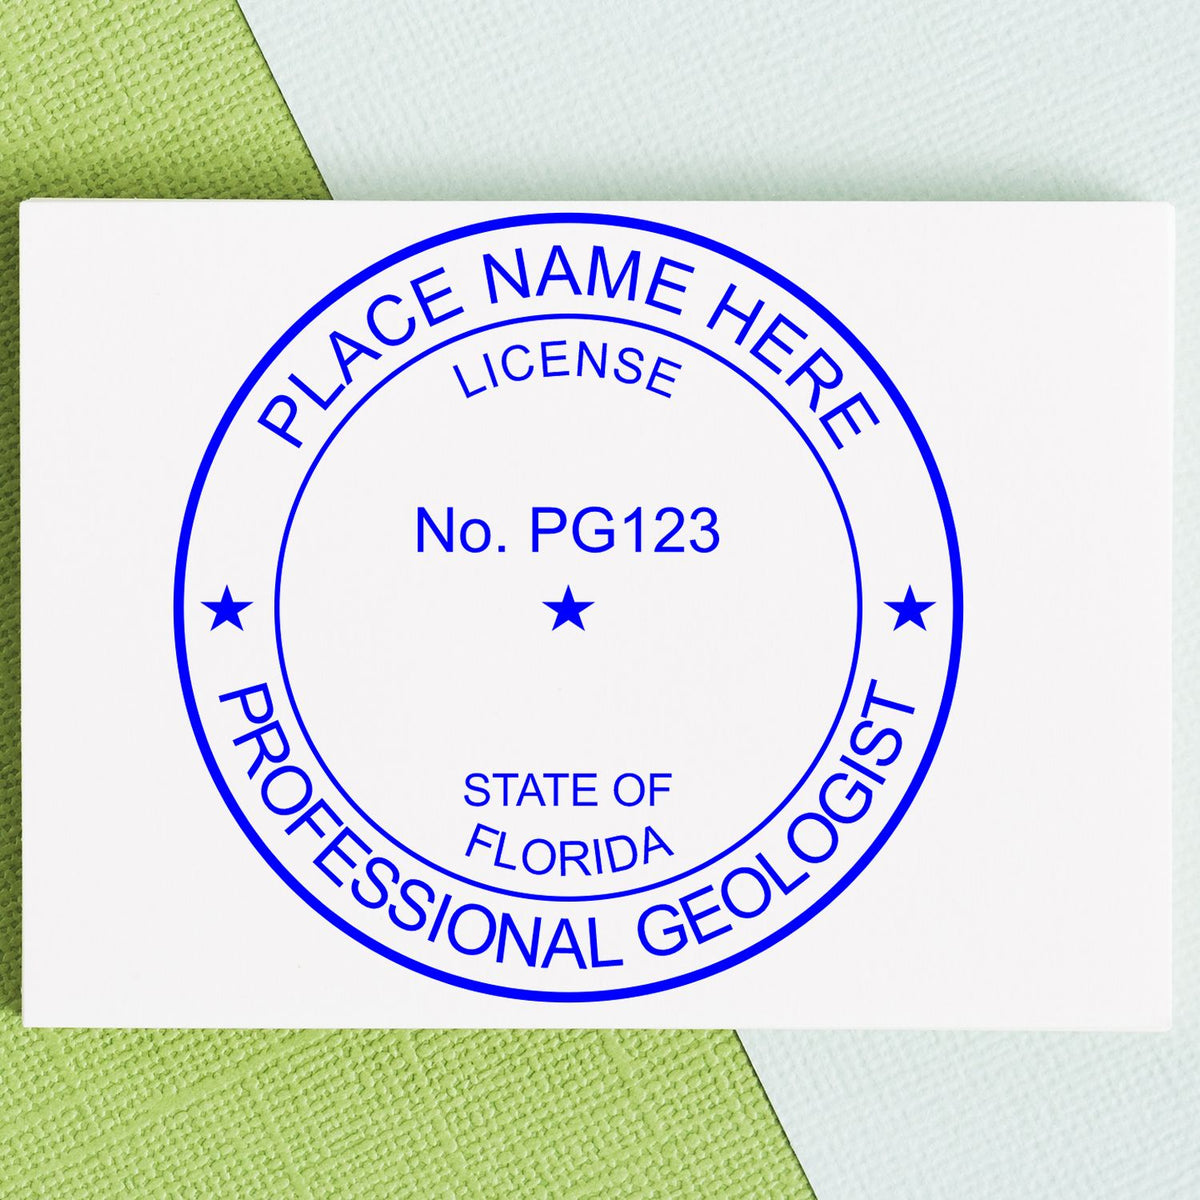 The Slim Pre-Inked Florida Professional Geologist Seal Stamp  impression comes to life with a crisp, detailed image stamped on paper - showcasing true professional quality.